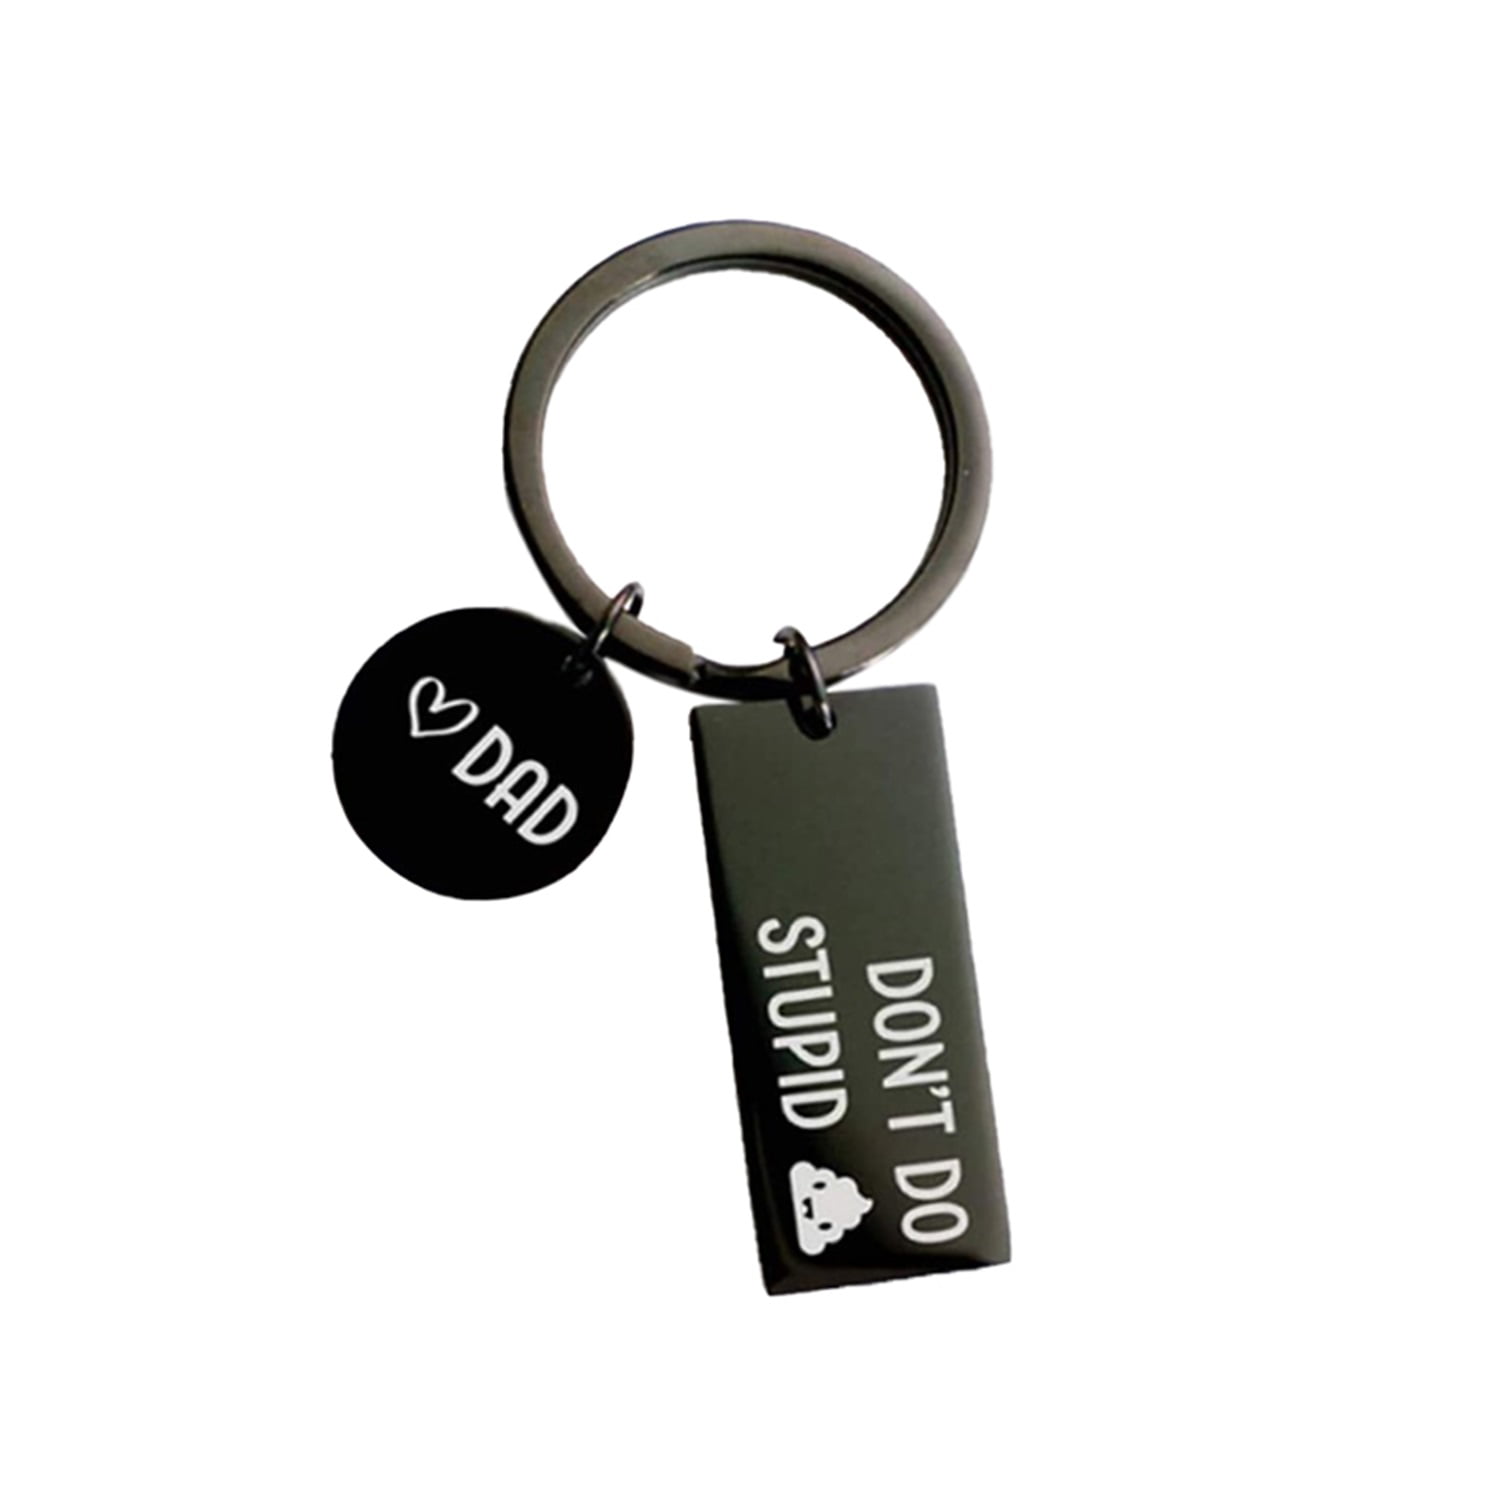 Alloy Funny Letter Engraved Keychain Key Ring Key Tag Gift For Boyfriend New S